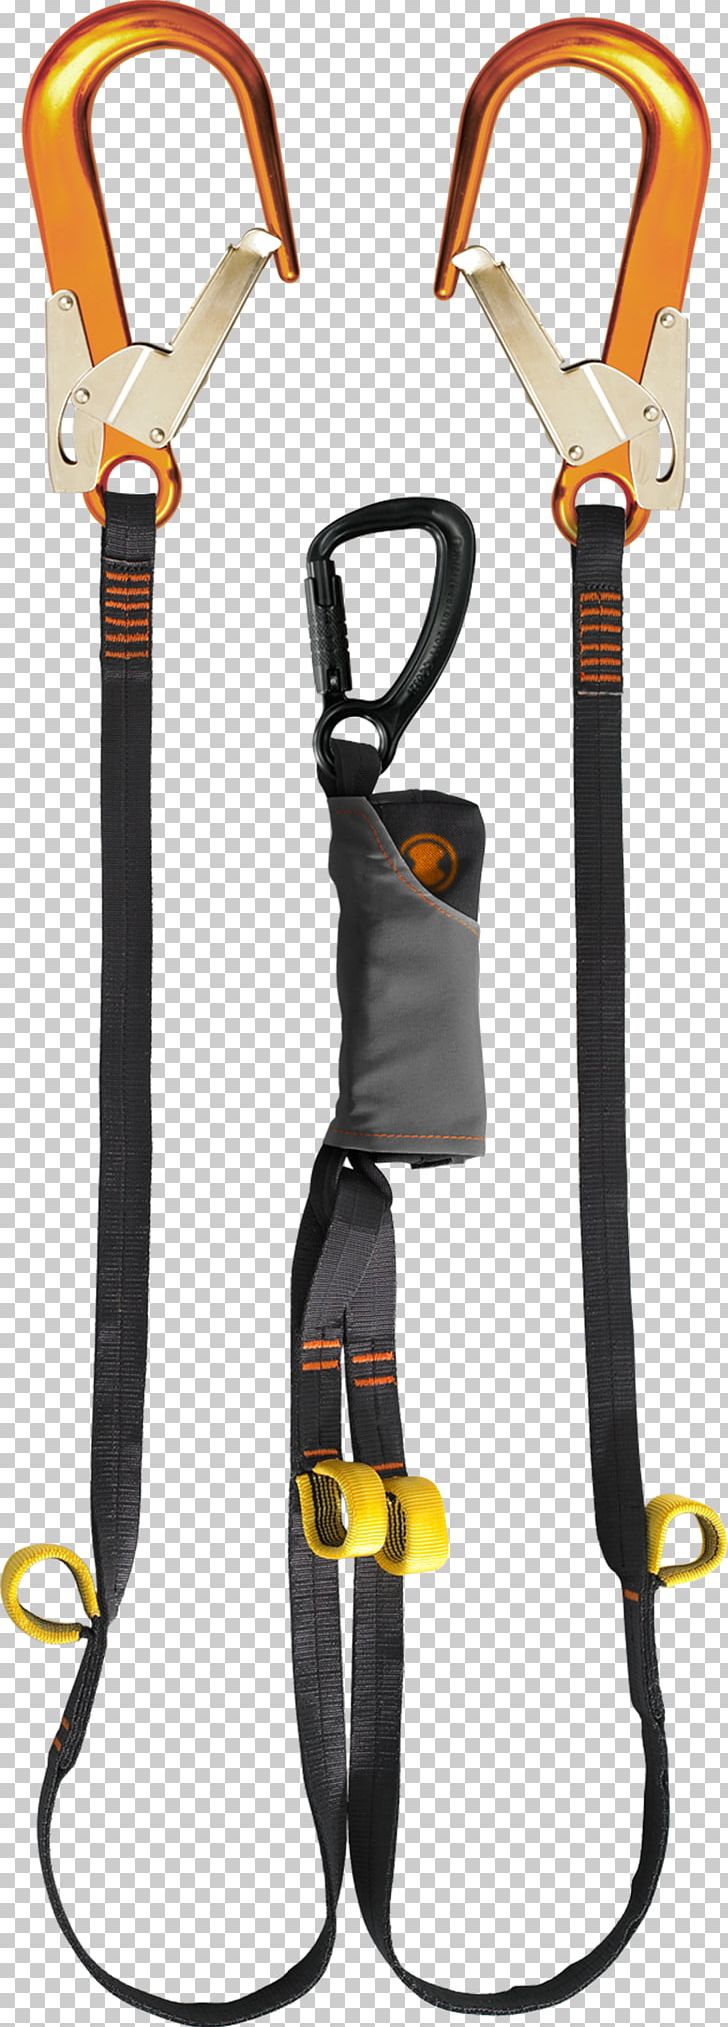 SKYLOTEC Absobeur D'énergie I-Flexband FS 90 Alu/Stak Tri Alu Climbing Harnesses Material Safety Harness PNG, Clipart,  Free PNG Download